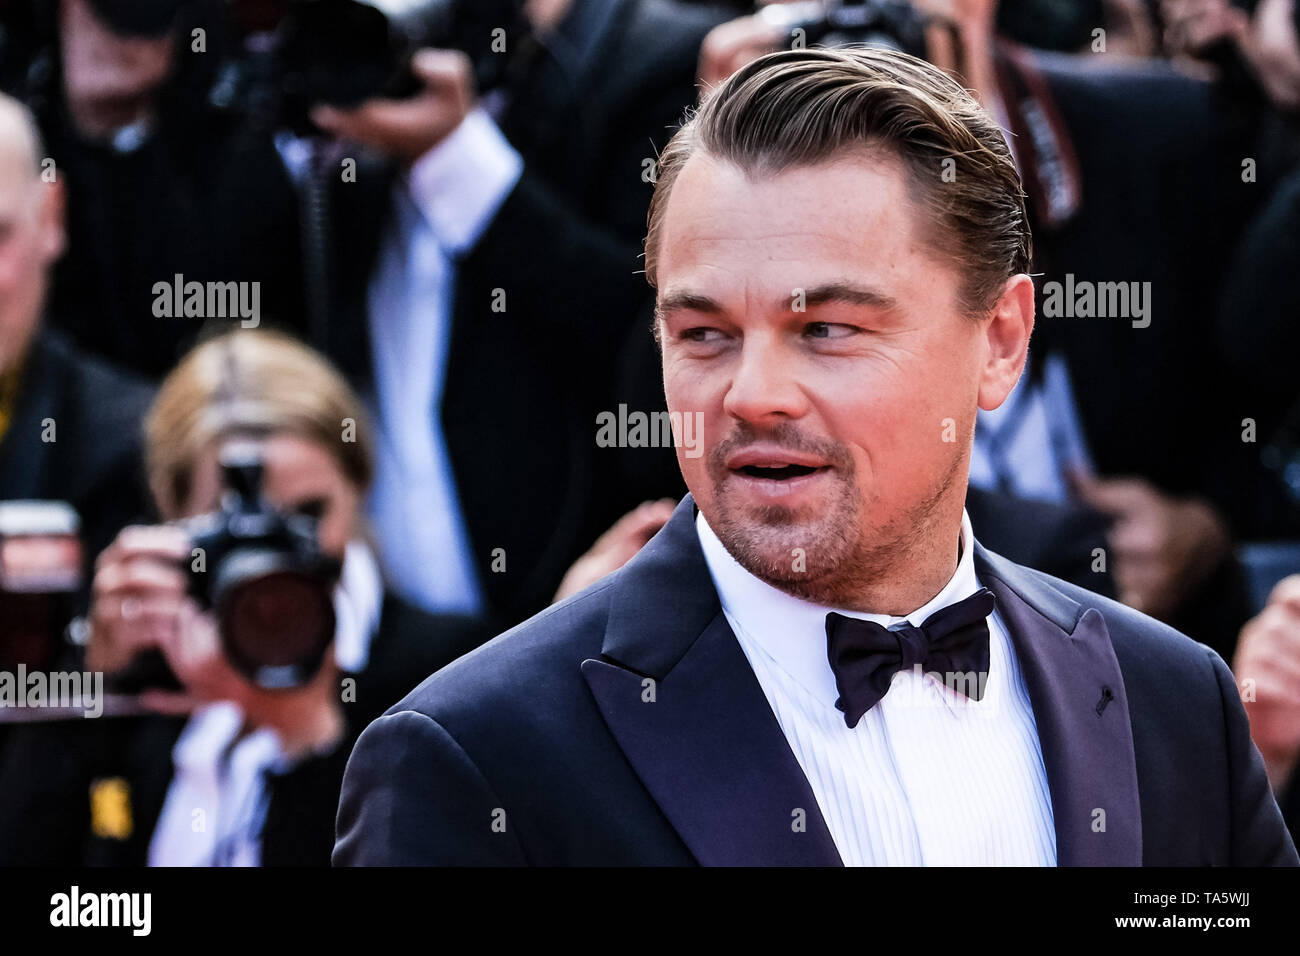 Leonardo DiCaprio poses  on the red carpet for Once Upon a Time In... Hollywood Premiere  on Tuesday 21 May 2019 at the 72nd Festival de Cannes, Palais des Festivals, Cannes. Pictured: Leonardo DiCaprio. Picture by Julie Edwards. Stock Photo